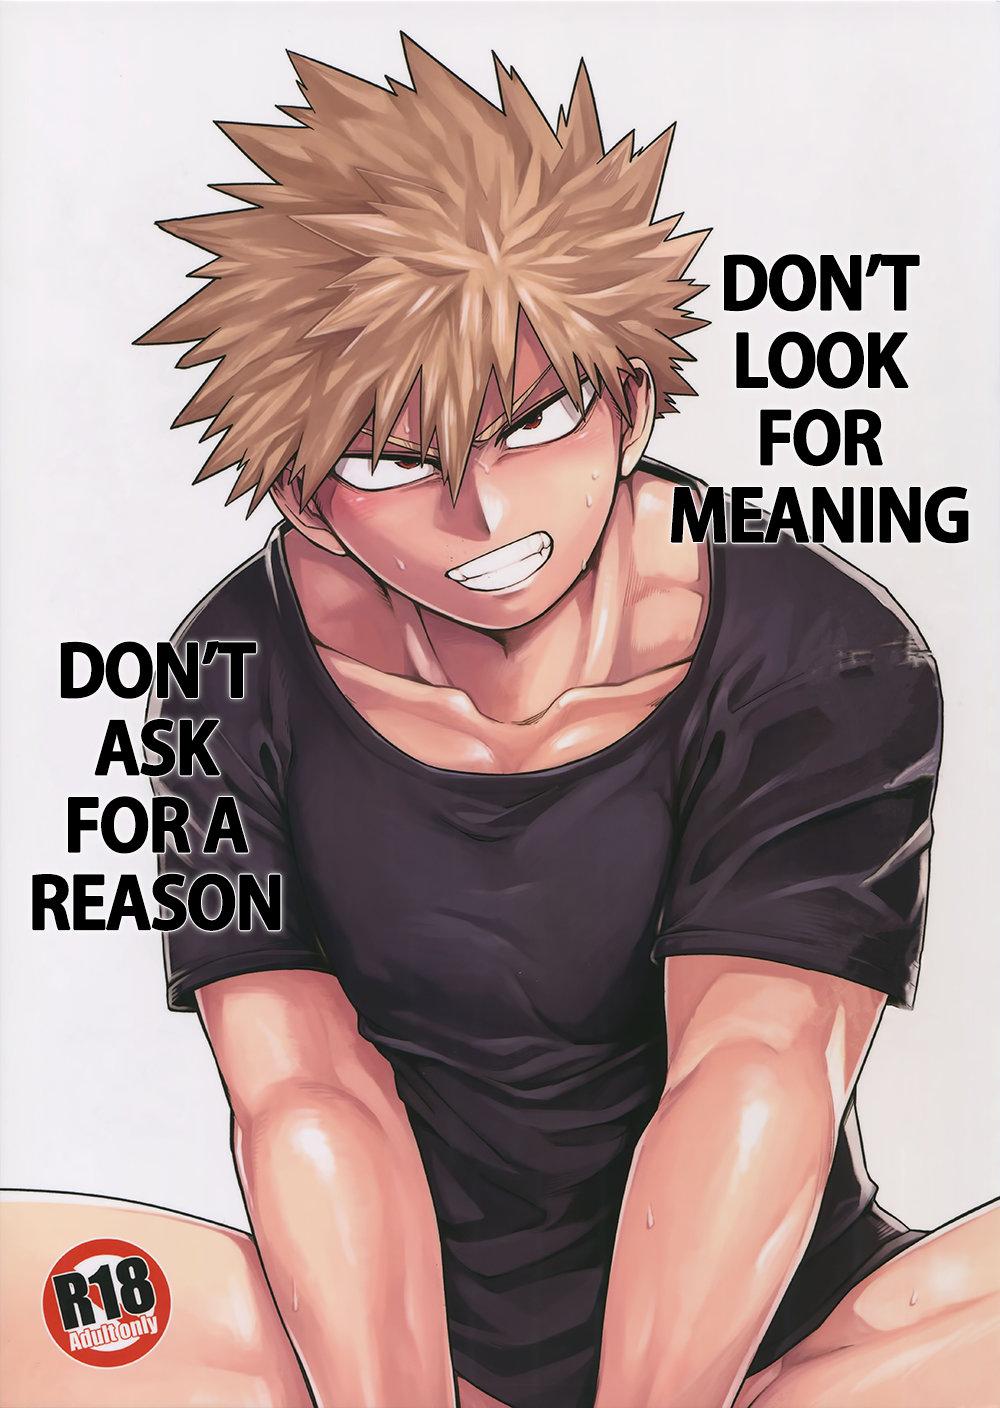 Tiny Imi o Sasuna Riyuu o Touna | Don't Look for Meaning, Don't Ask for a Reason - My hero academia Best Blowjob - Picture 1